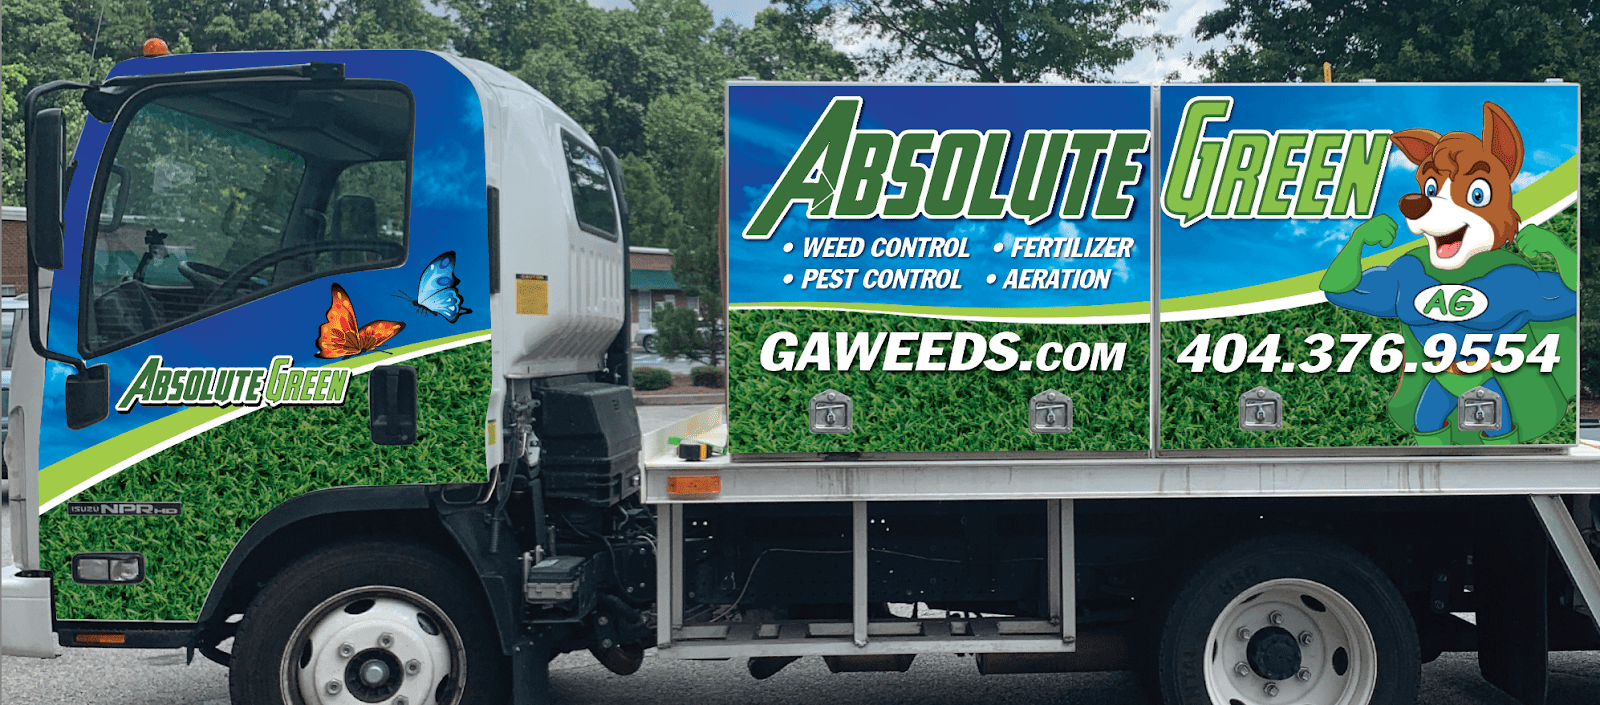 Truck side video with the logo of Absolute Green Landscaping. GA Weeds, 404-376-9554, Weed Control, Fertilizer, Pest Control, Aeration.